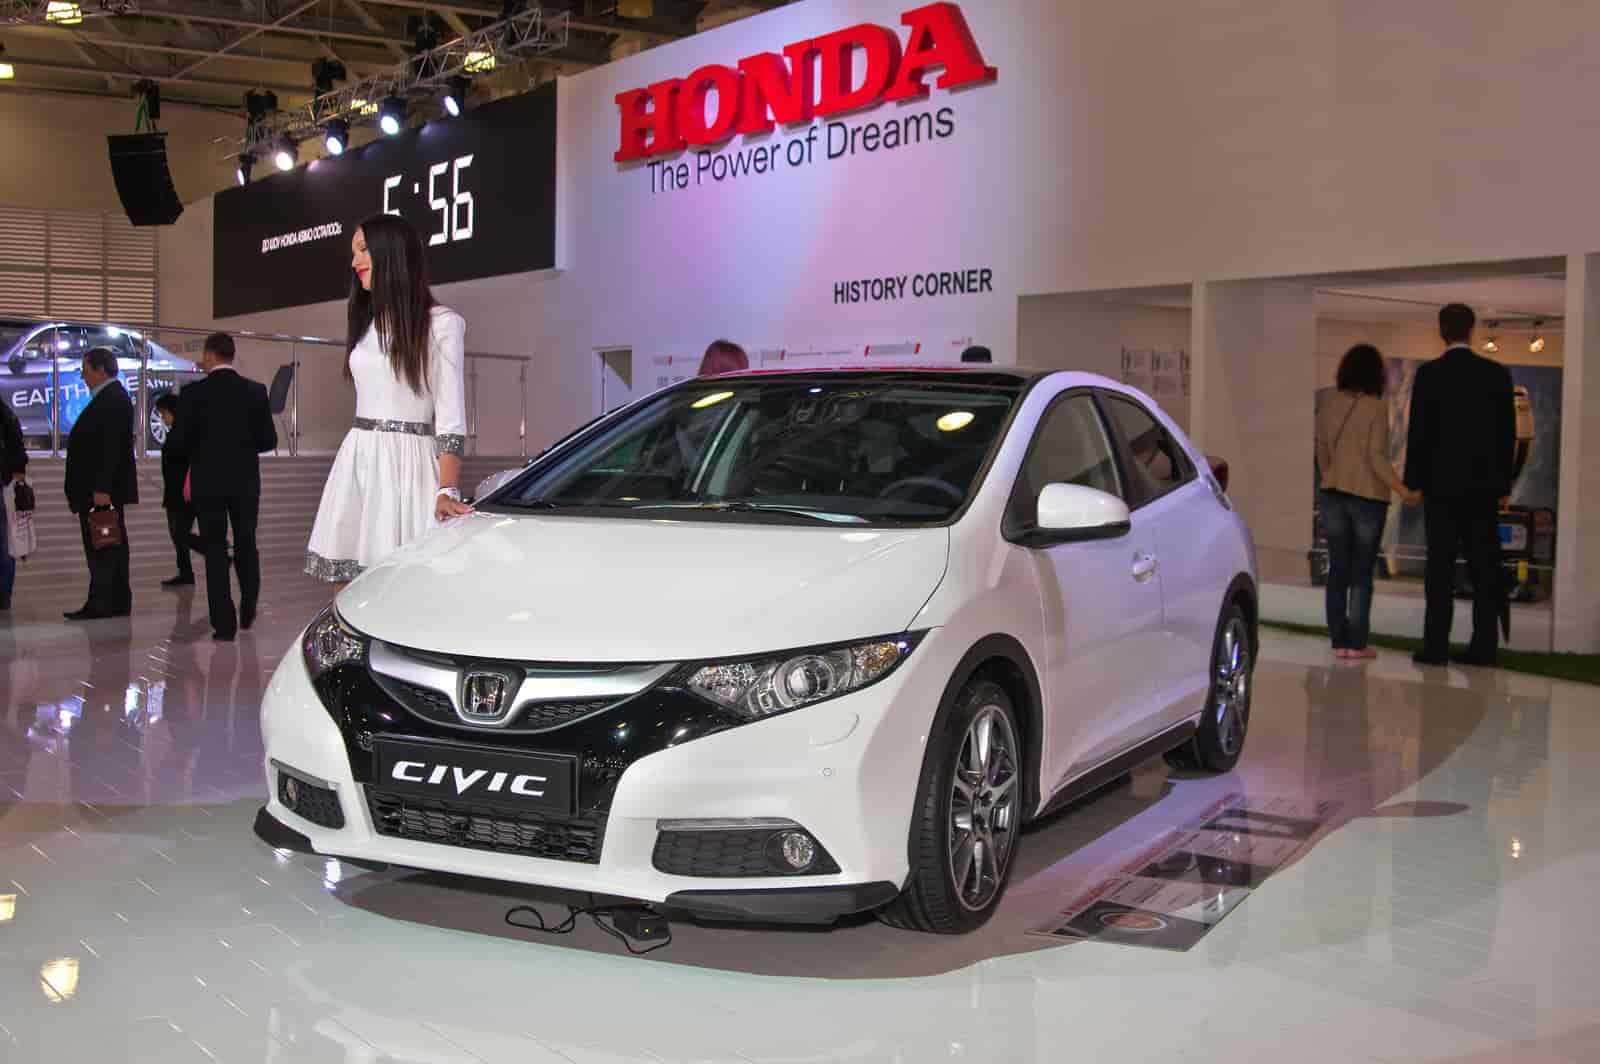 How Much Does It Cost To Lease A Honda Civic? [ Exact Breakdown ]